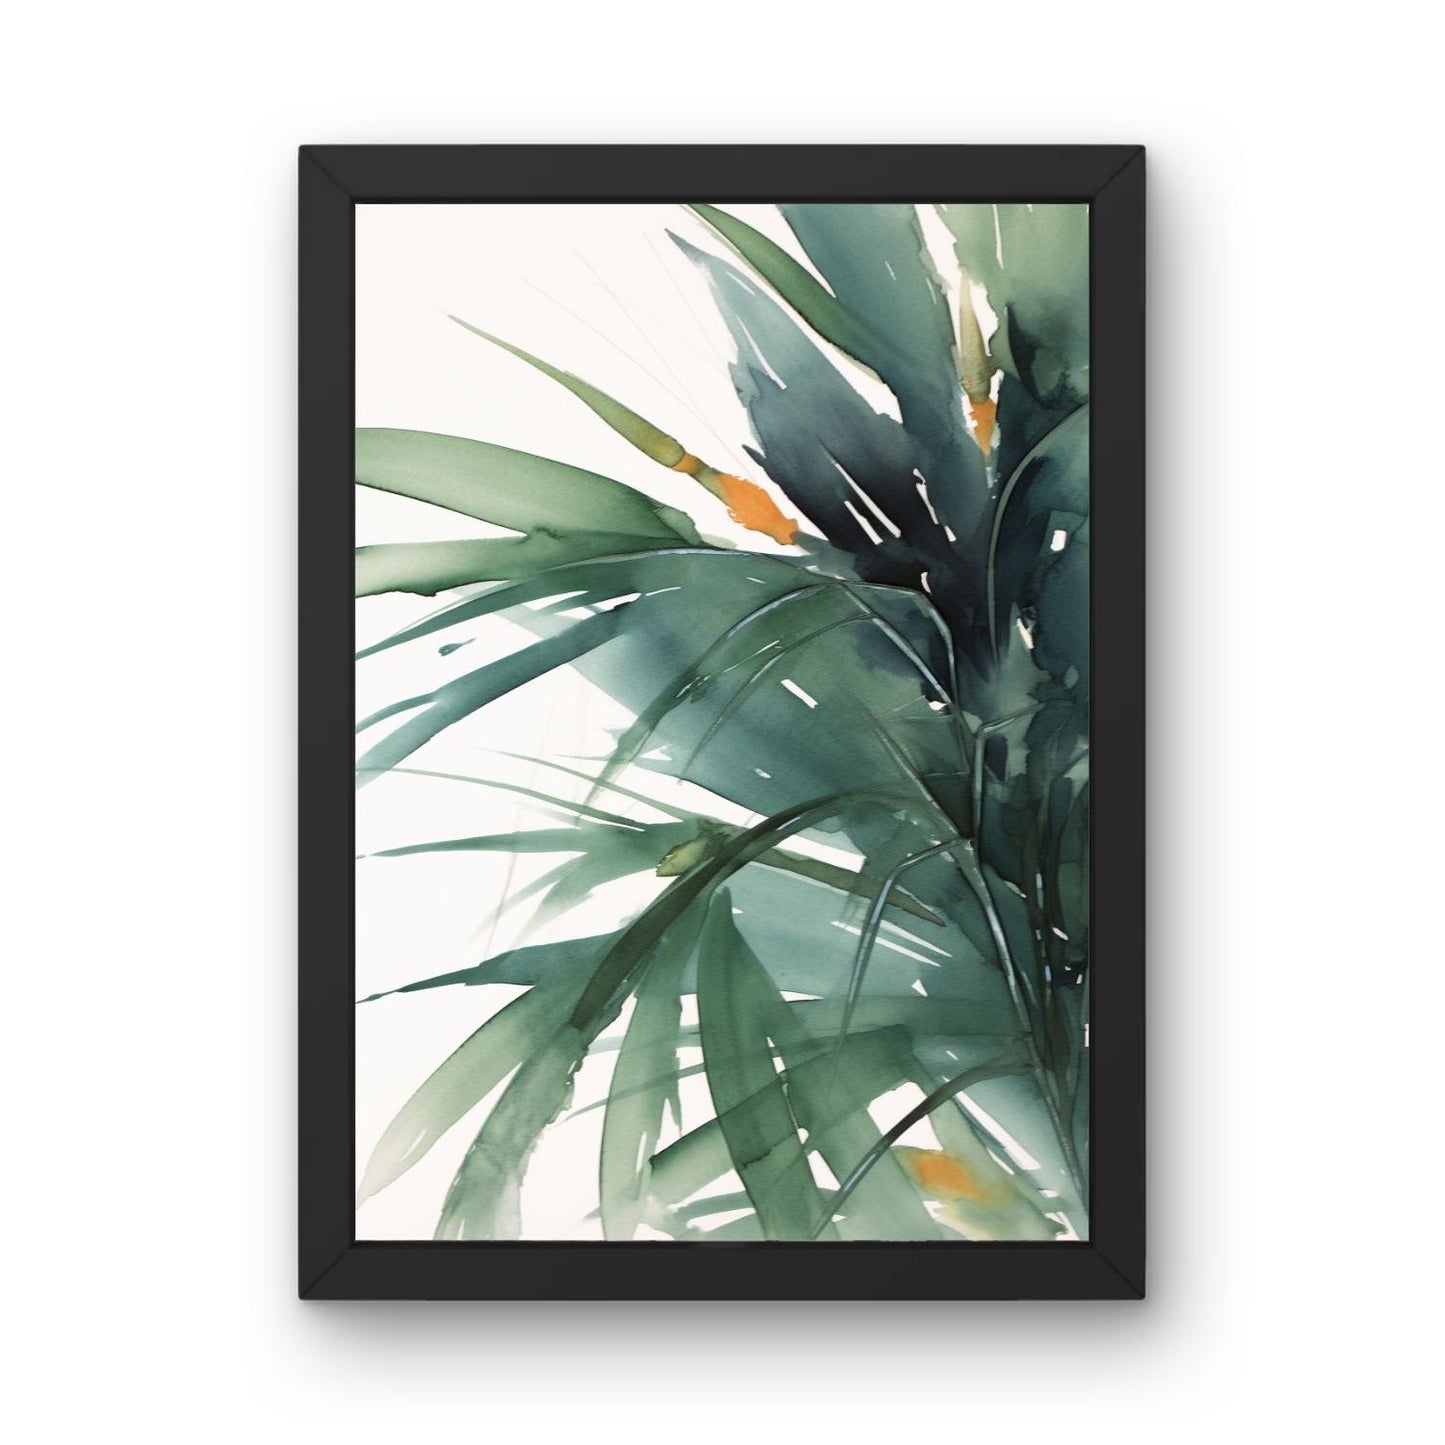 Botanical Perfection by NYC Abstract (Gallery Wall Set of 3)